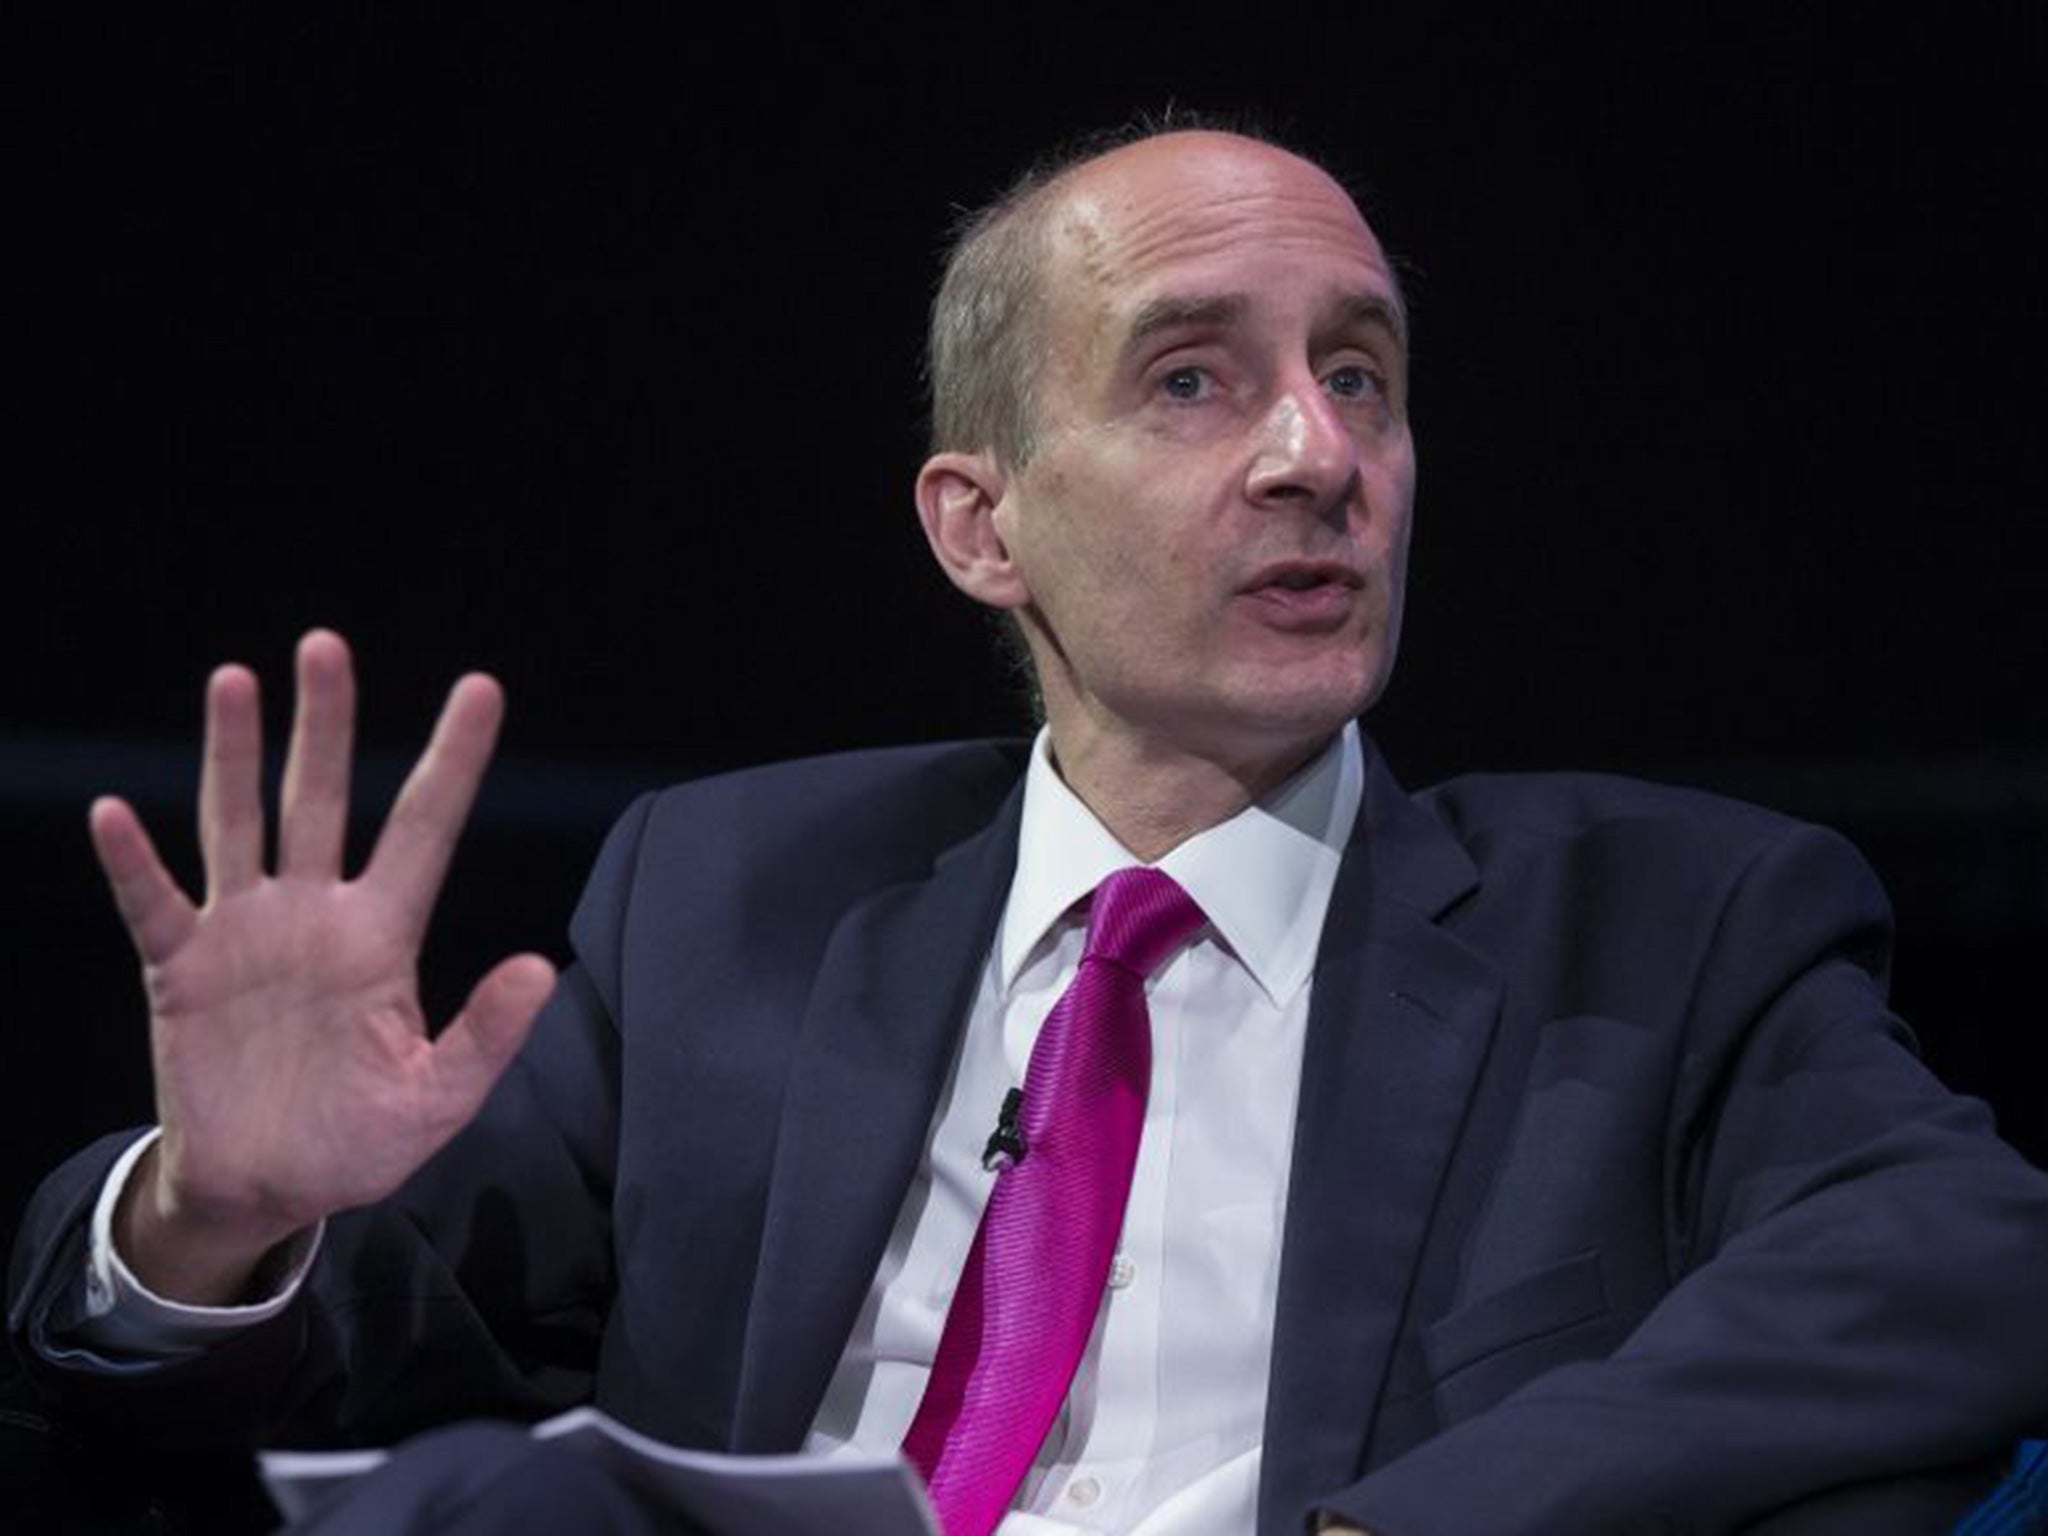 Lord Adonis says fees and top salaries should be slashed